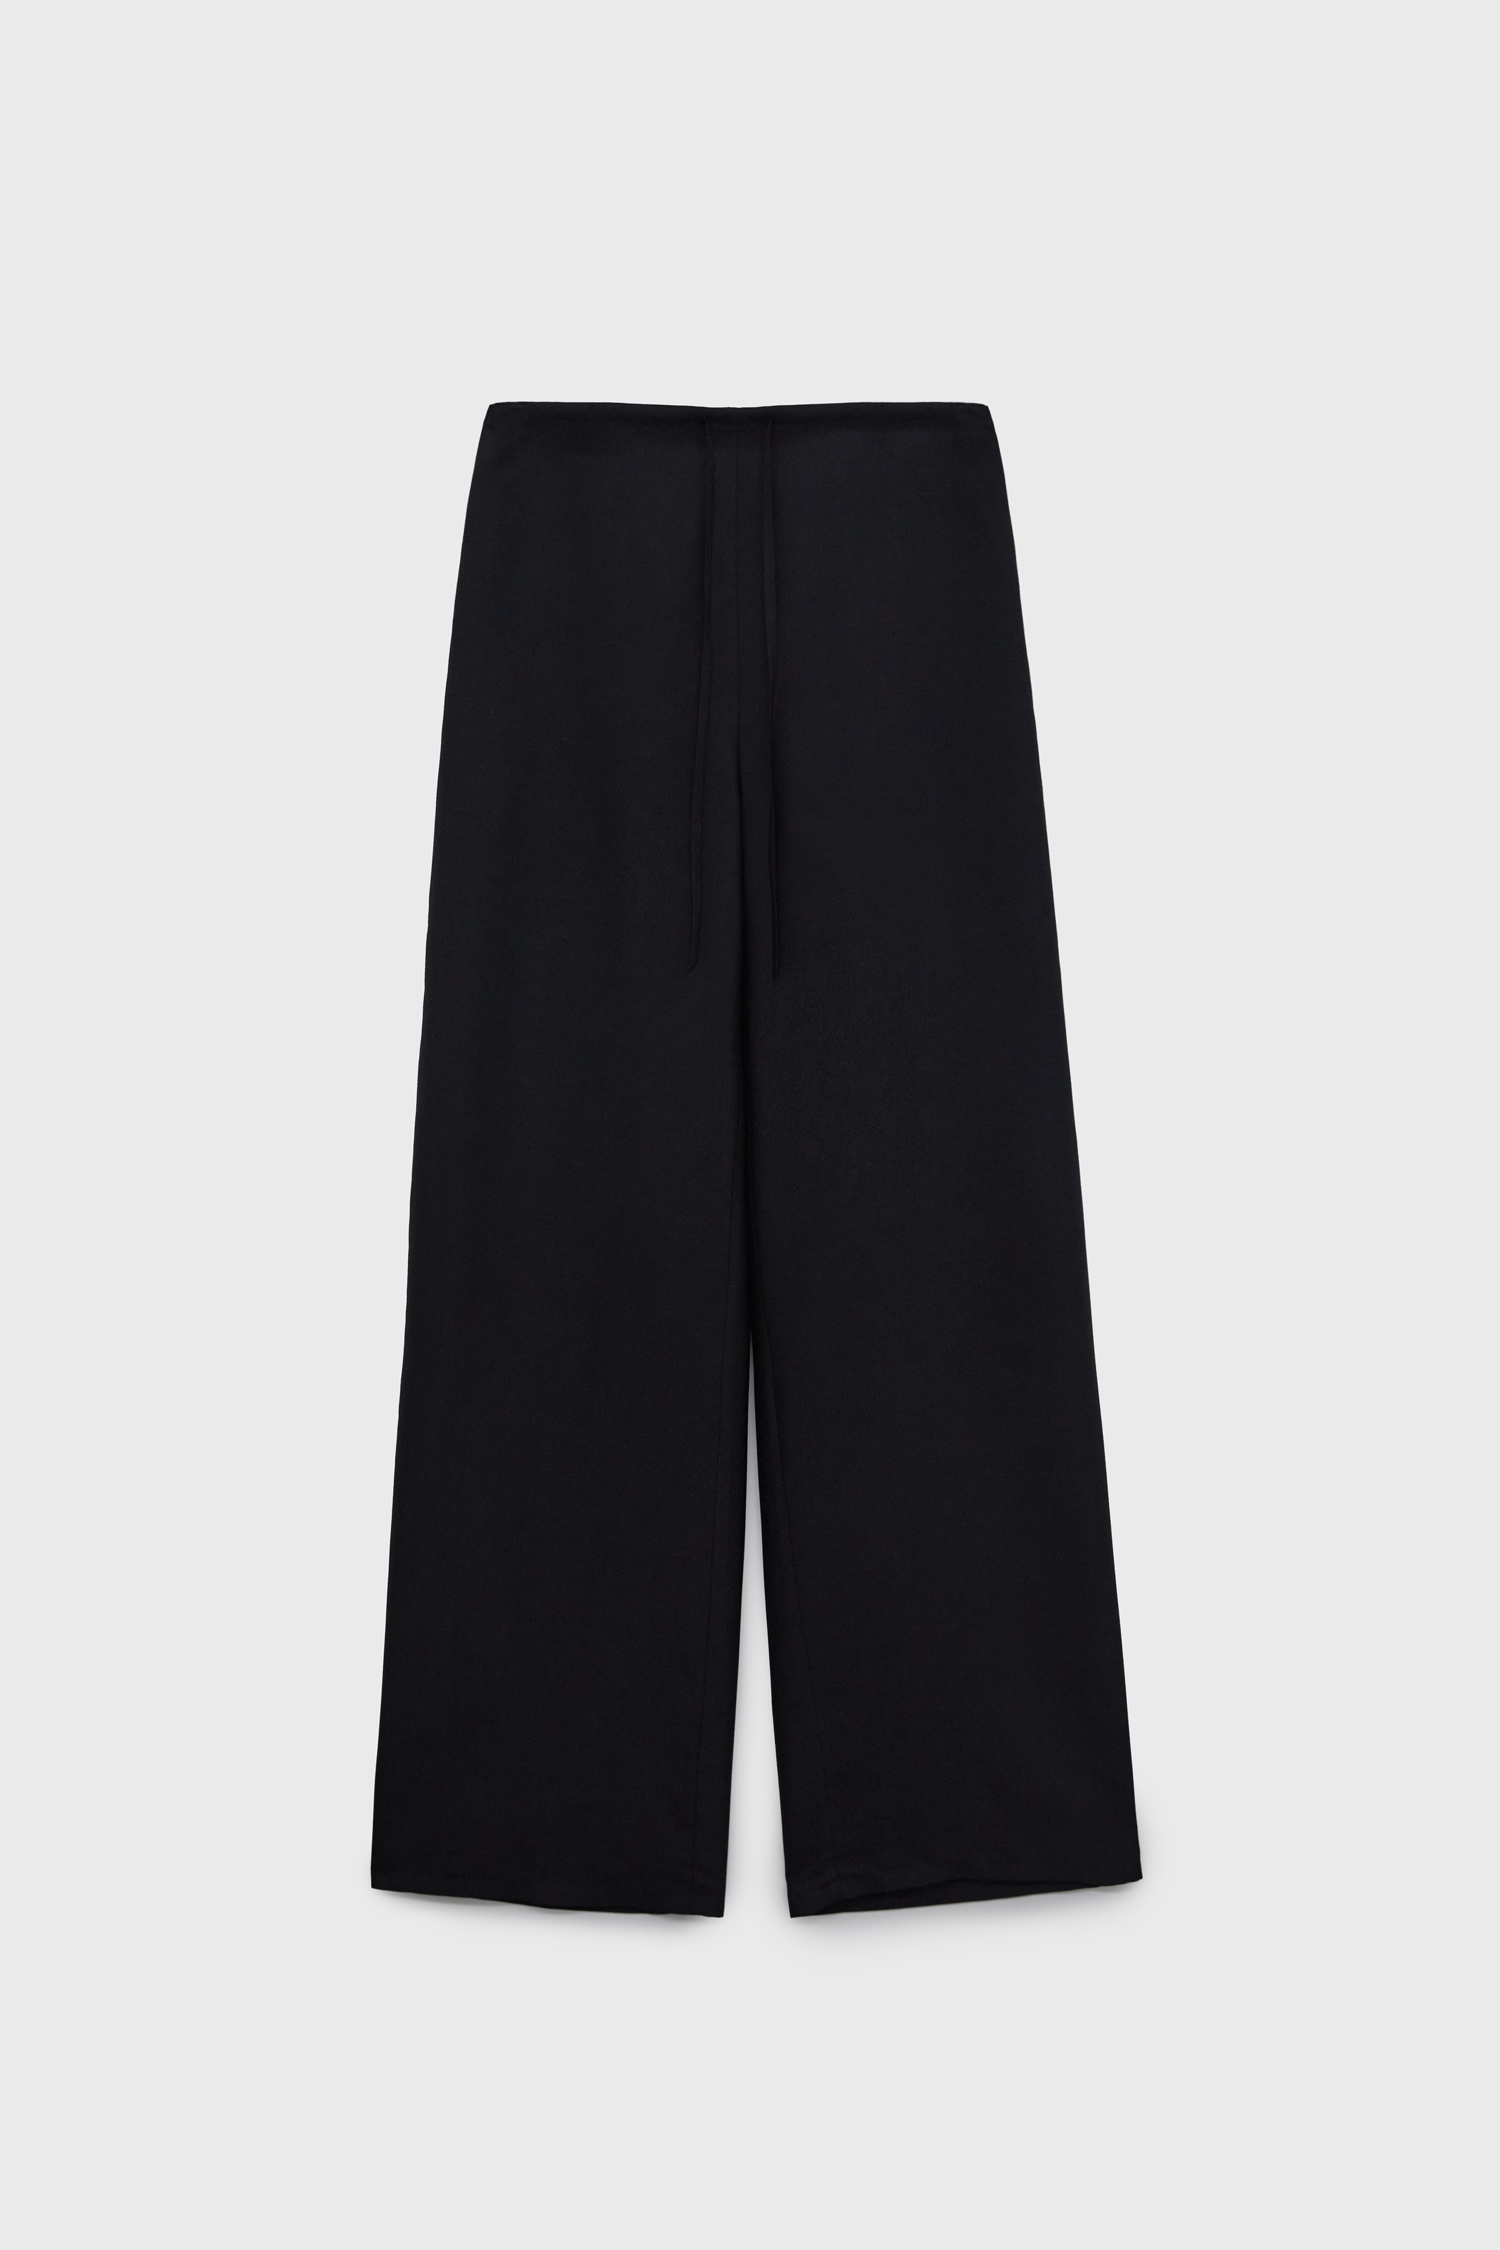 Two Layers Wide String Silk Pants